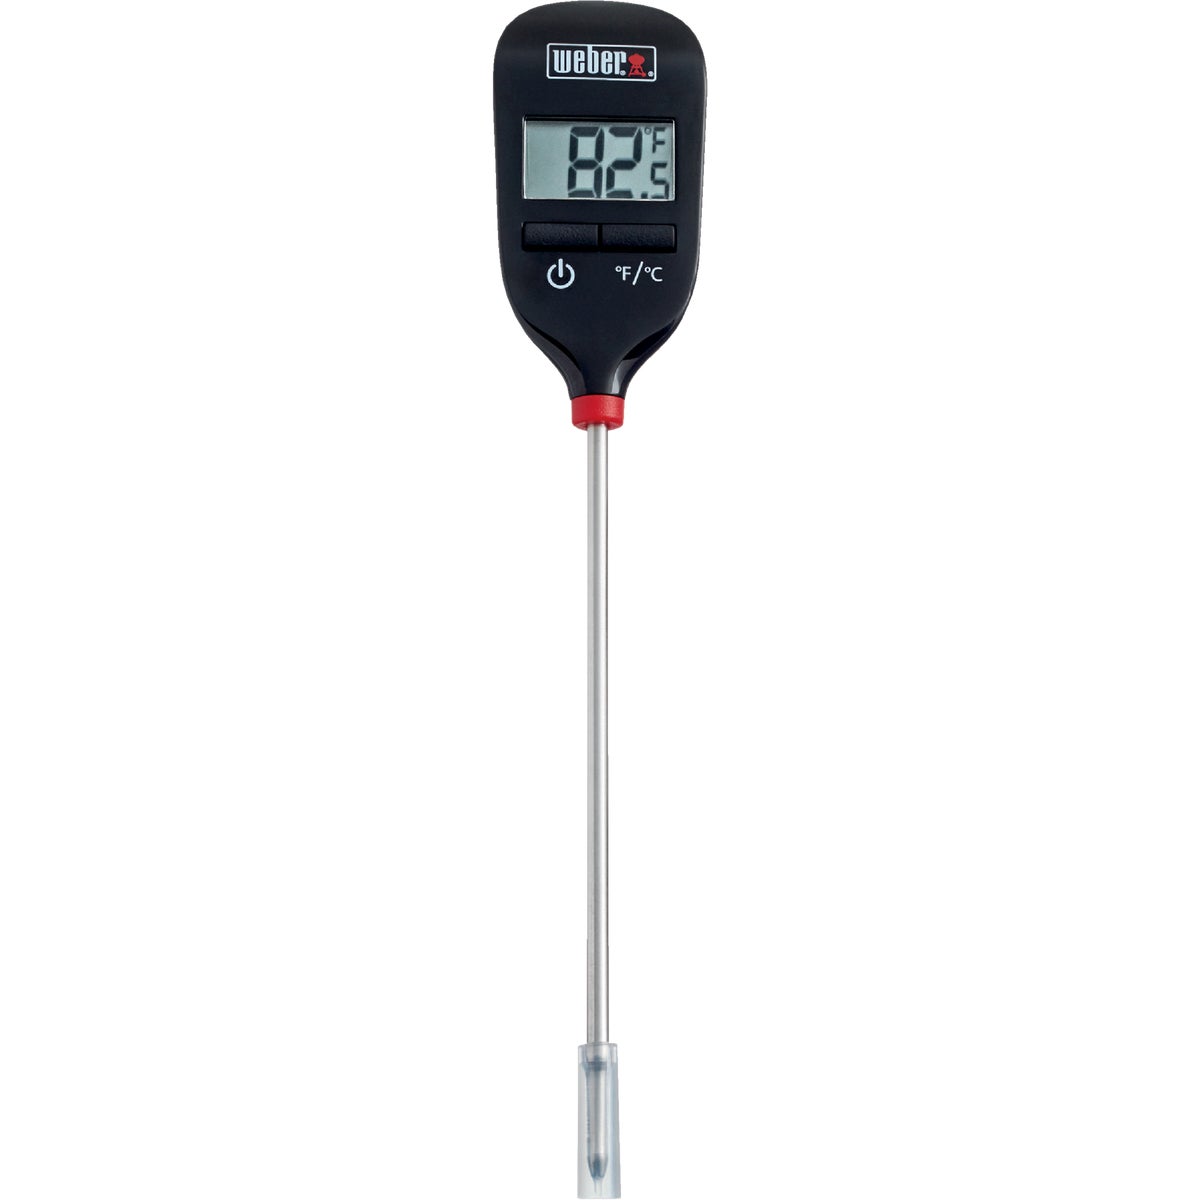 Item 800411, Digital temperature read-out switches between Fahrenheit and Celsius.